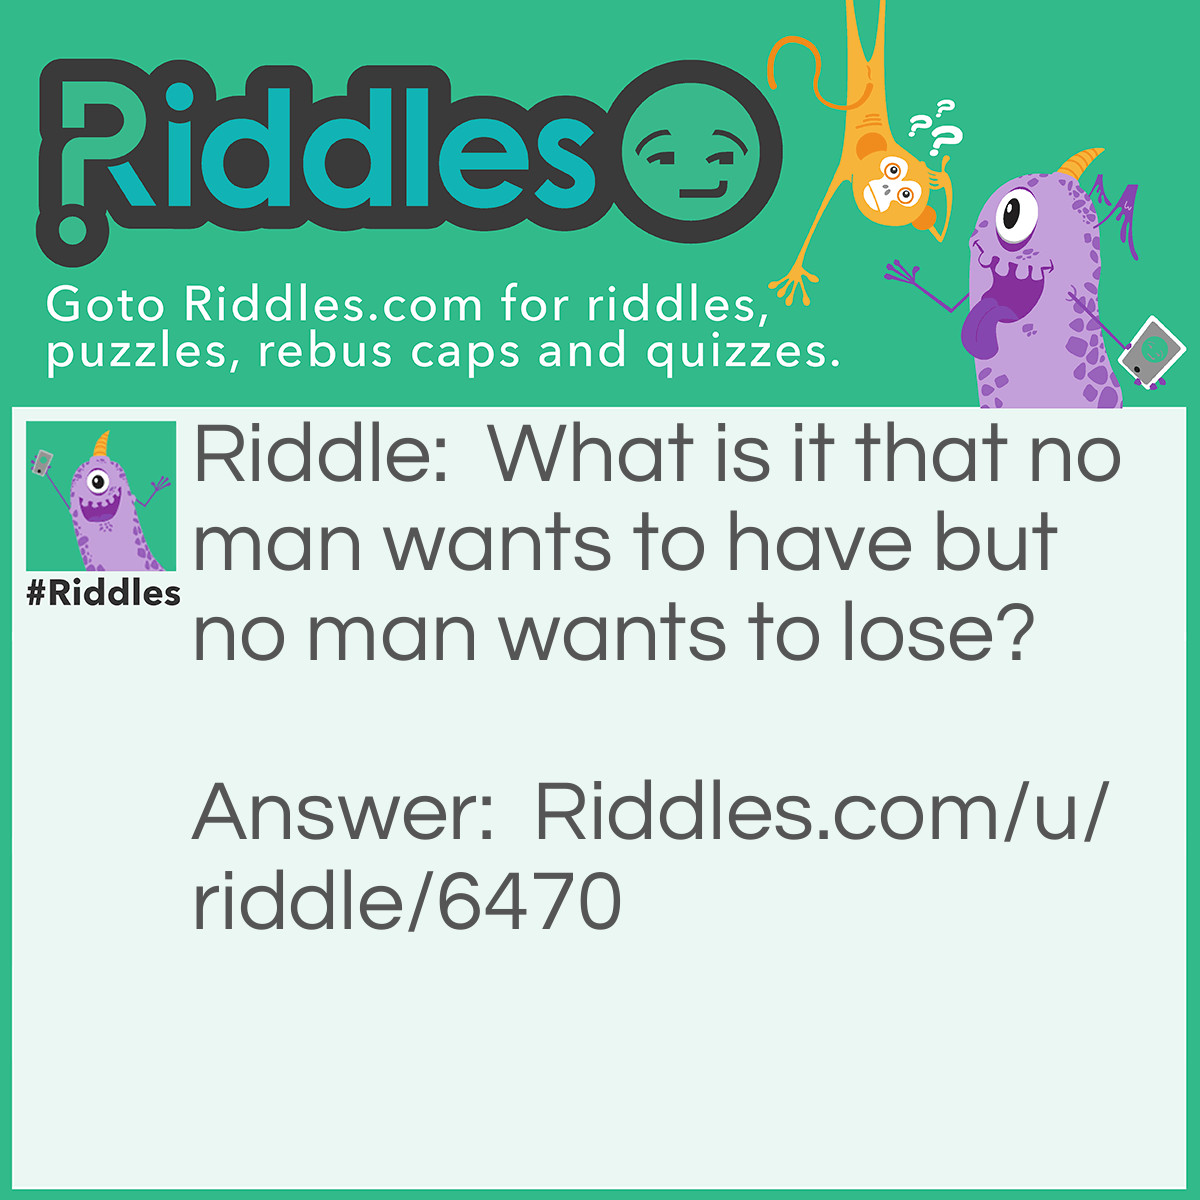 Riddle: What is it that no man wants to have but no man wants to lose? Answer: A lawsuit.